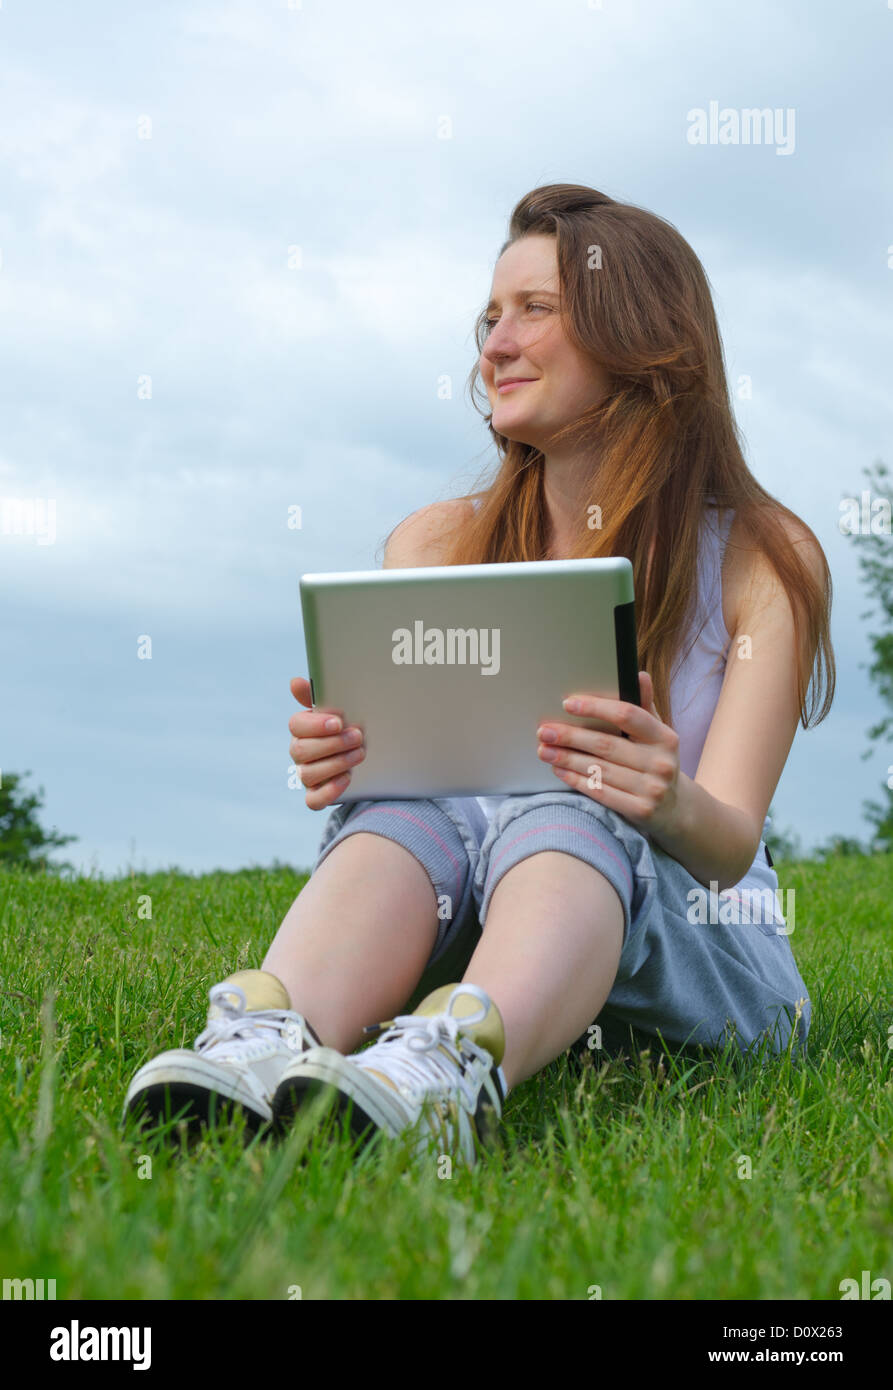 Low angle view of a happy laughing woman sitting on grass with a touchscreen tablet in her hands Stock Photo